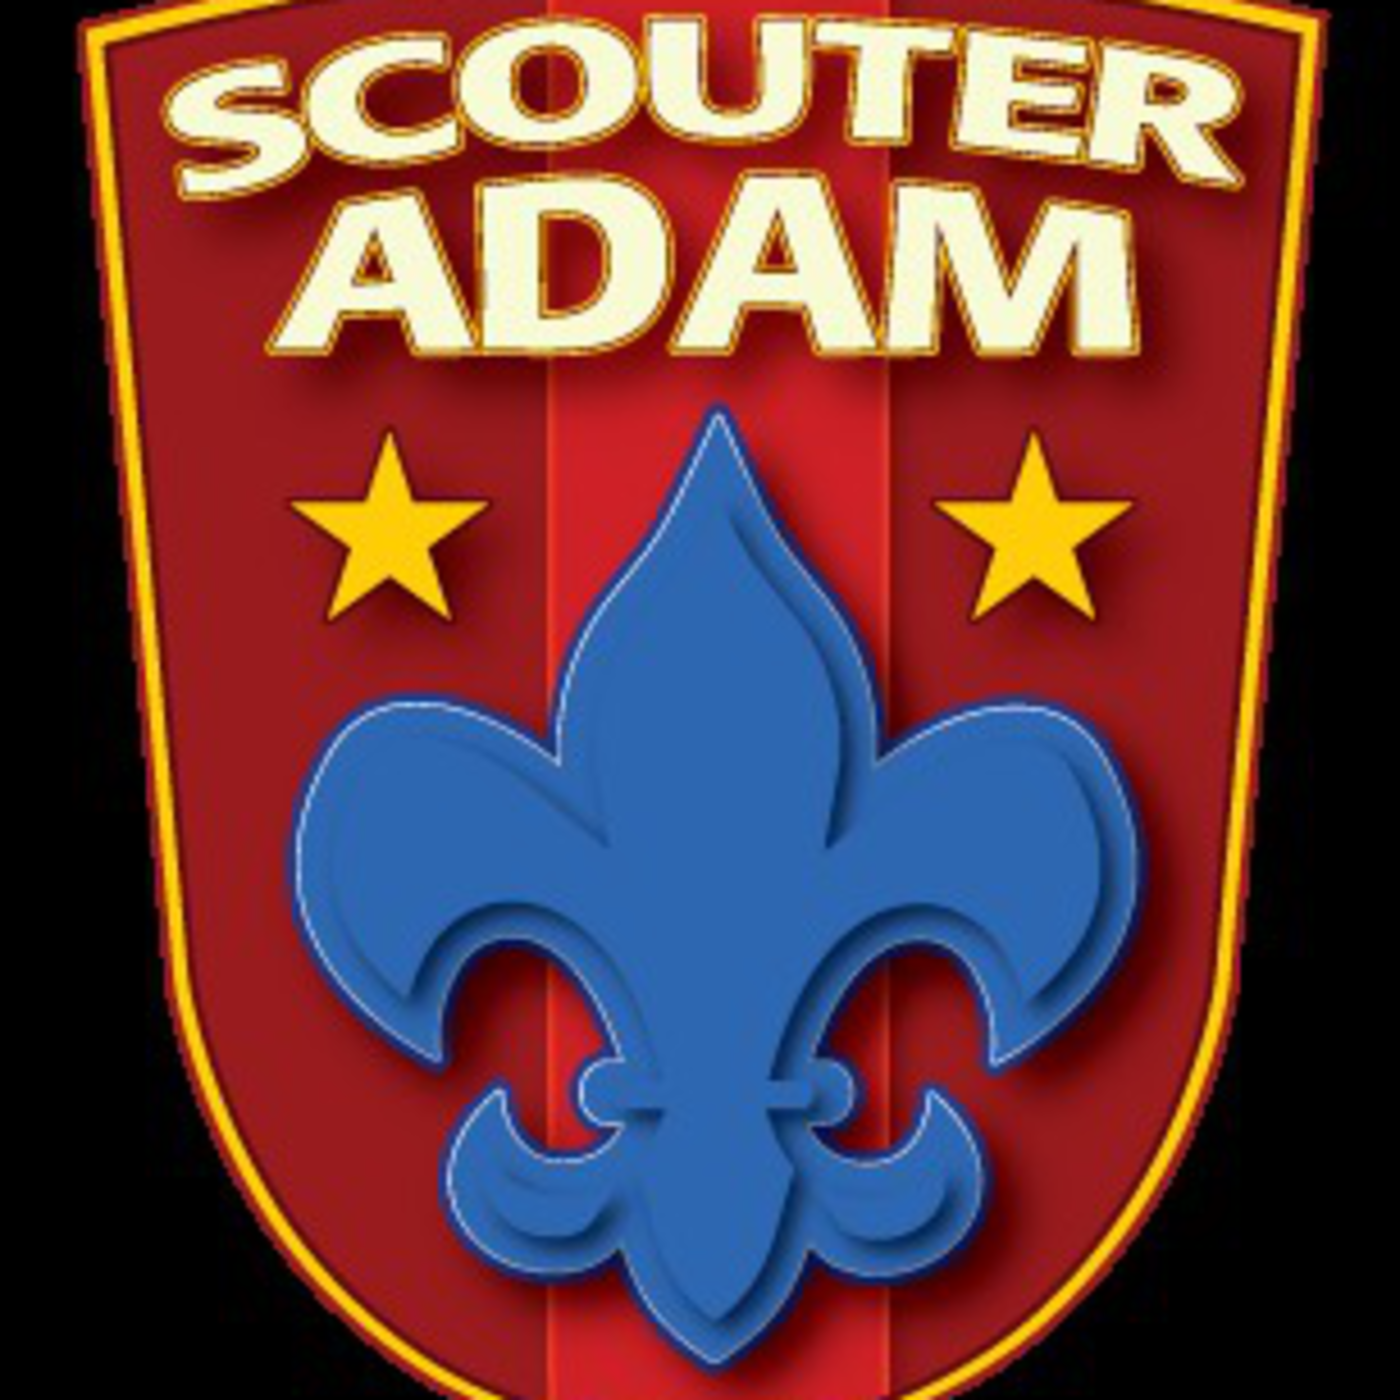 Scouter Adam: The Cubmaster Roundtable